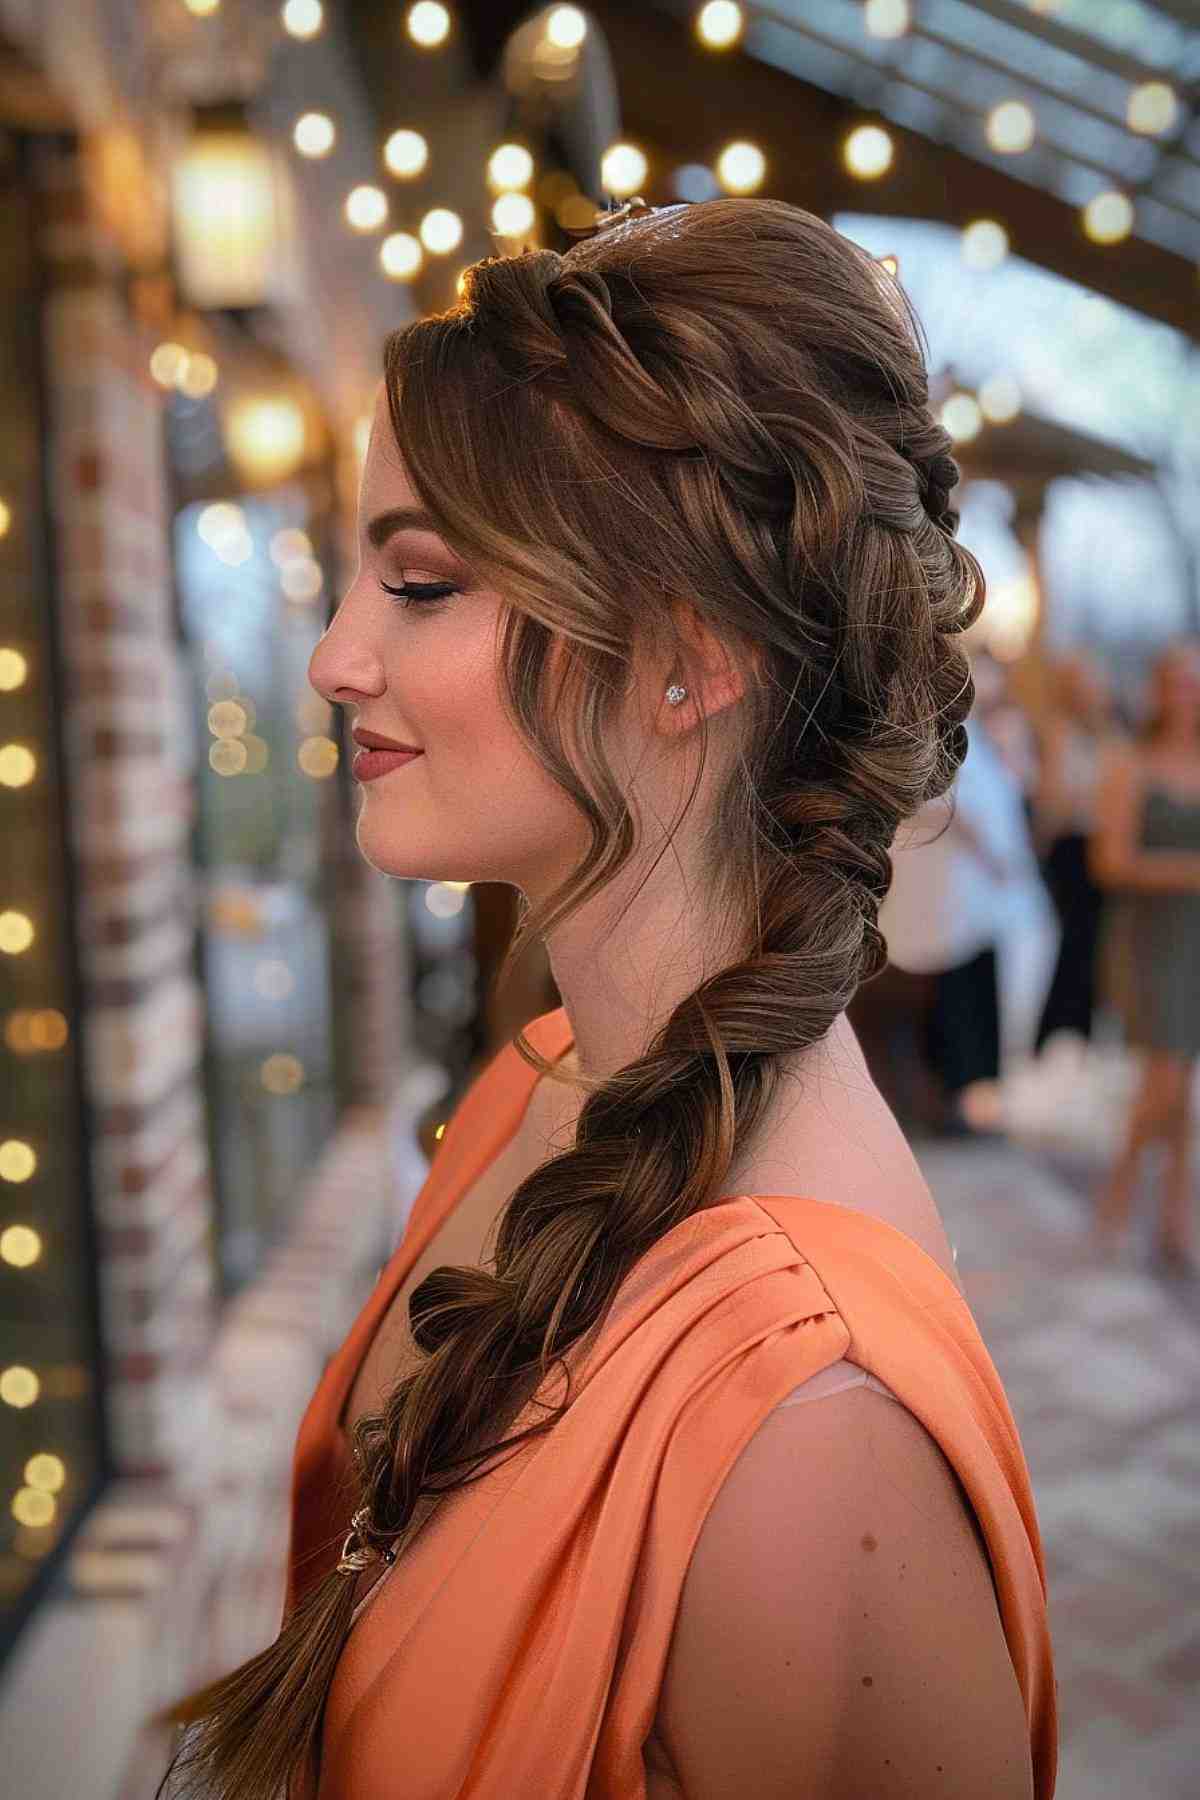 Crown and side braid for a romantic gala hairstyle.